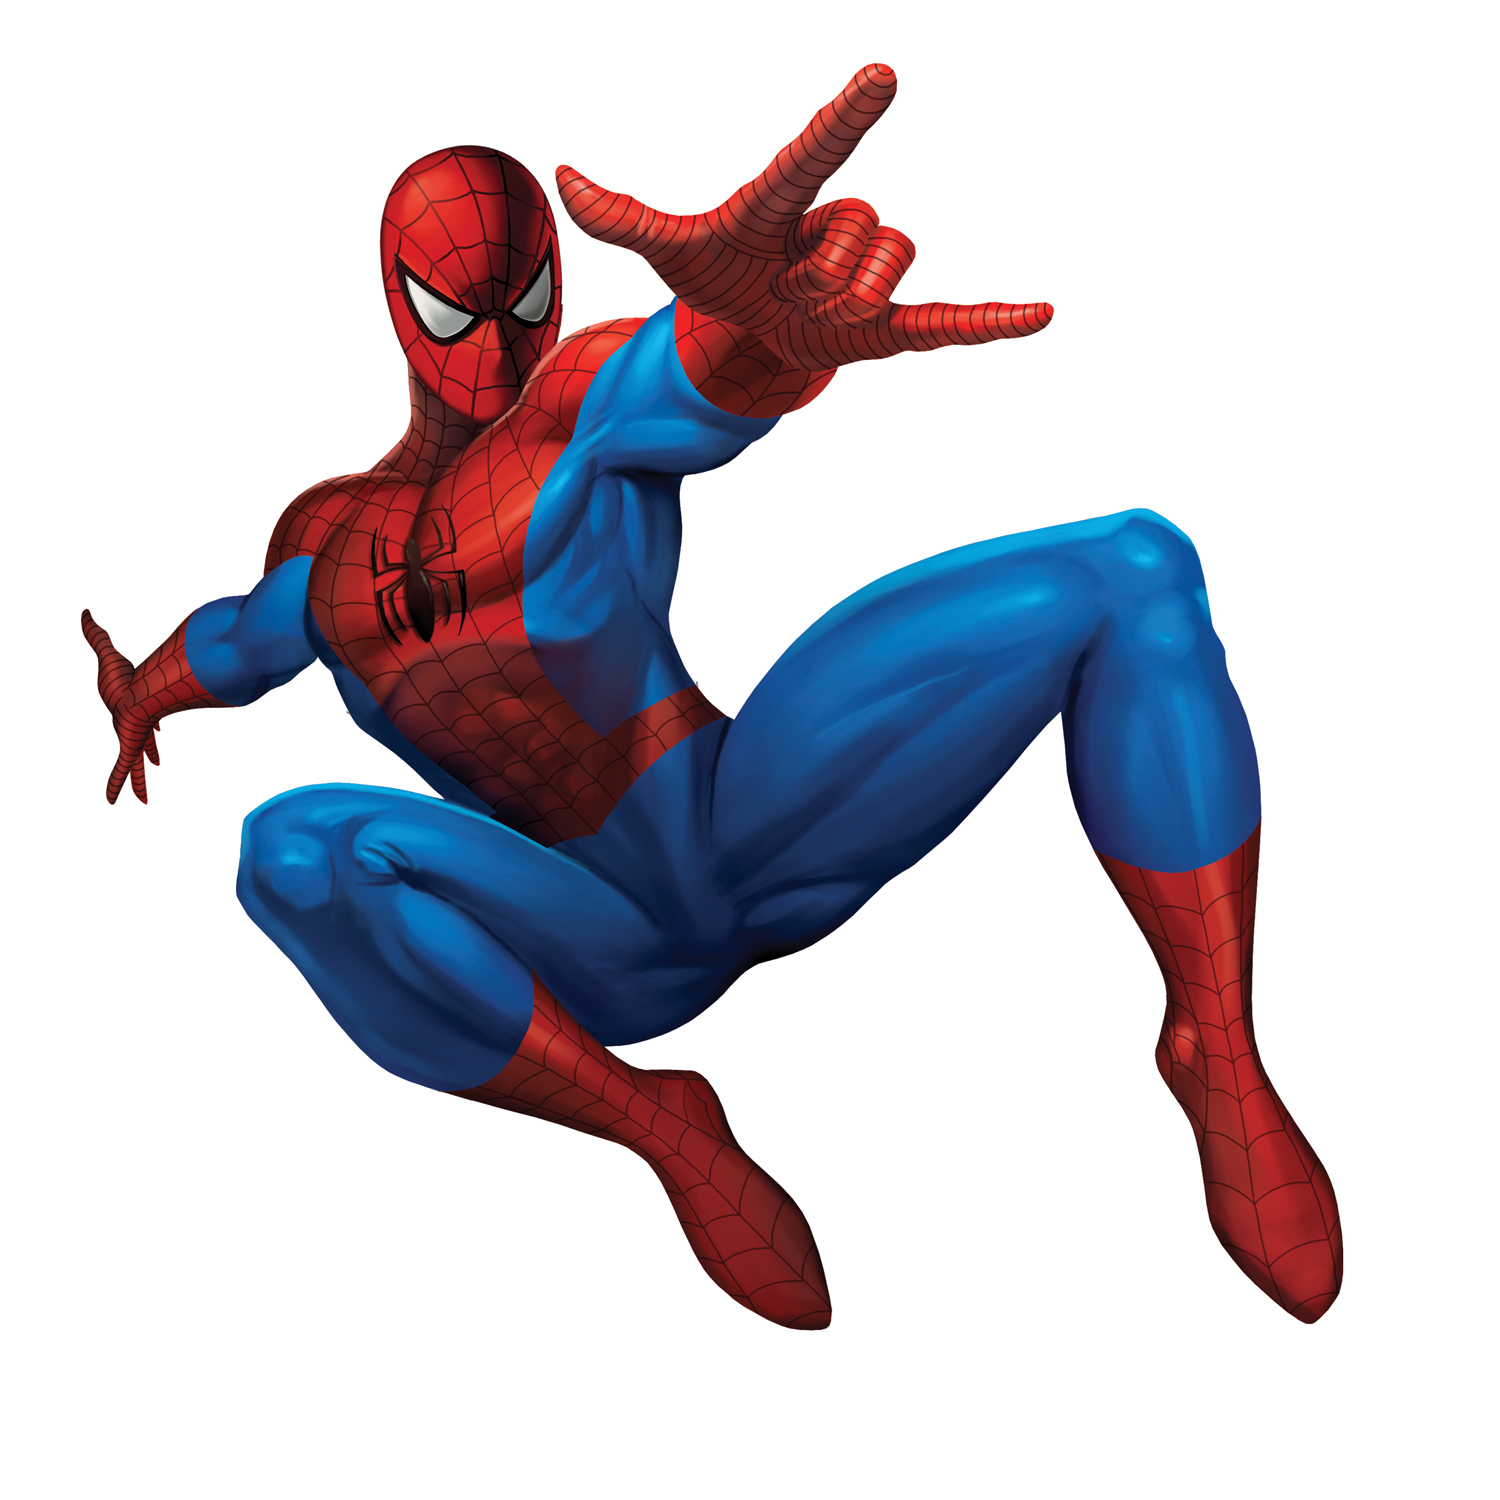 Spider Man on white background wallpapers and images ...